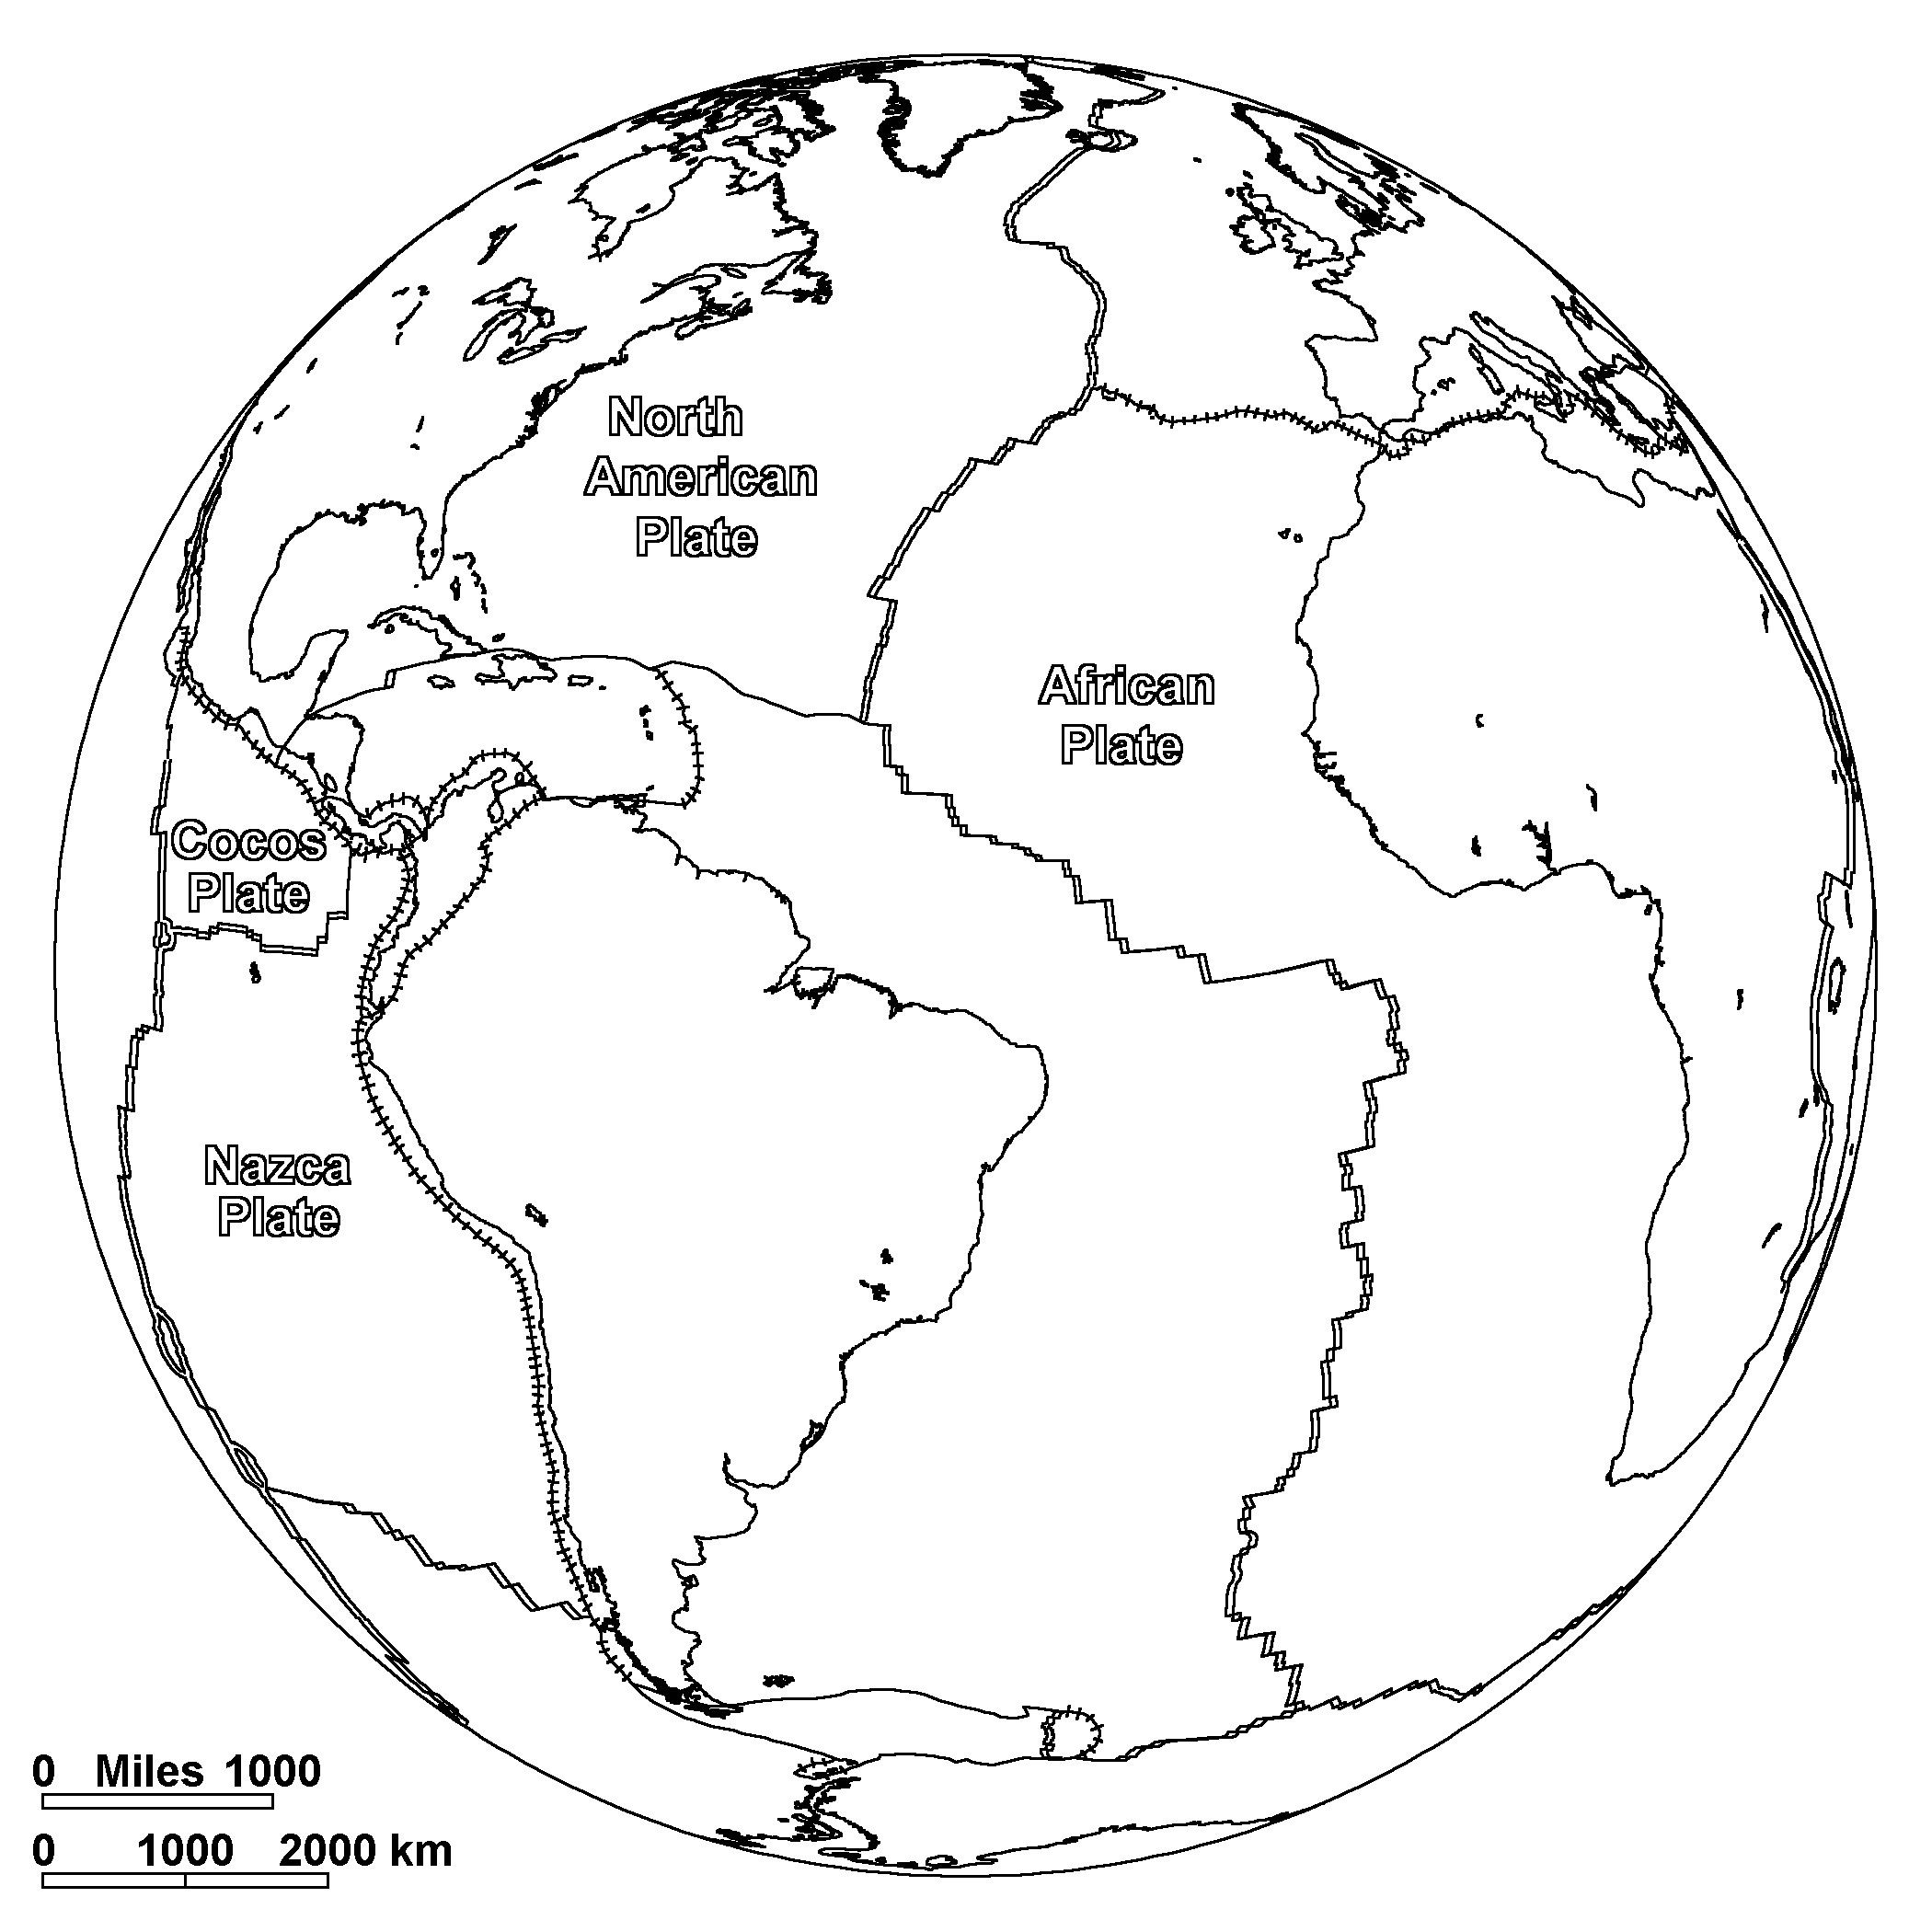 World Map Coloring Page For Kids Coloring Home